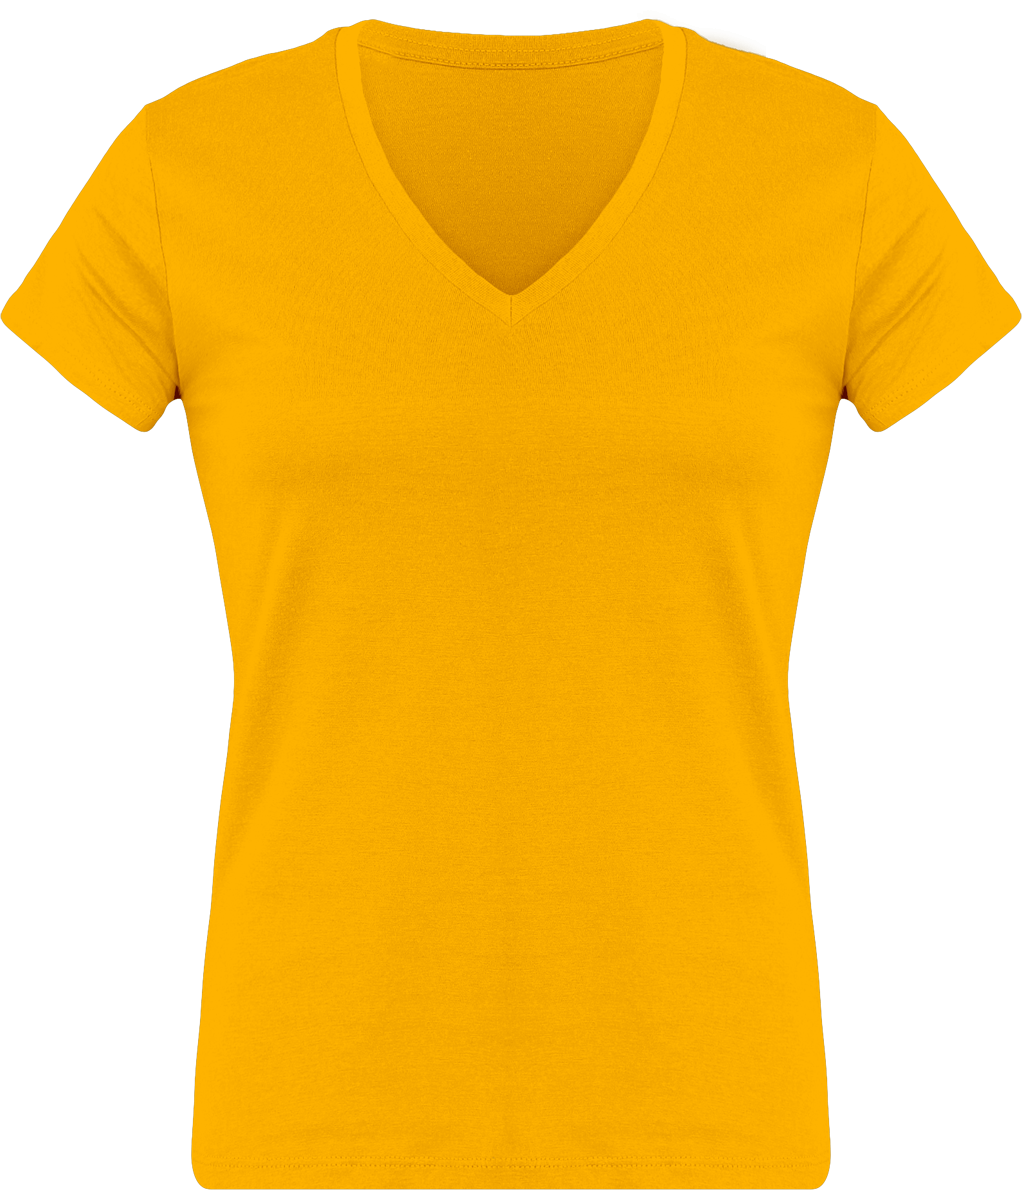 Customizable Women's T-Shirt, Feminine And Comfortable With Its V-Neck Yellow